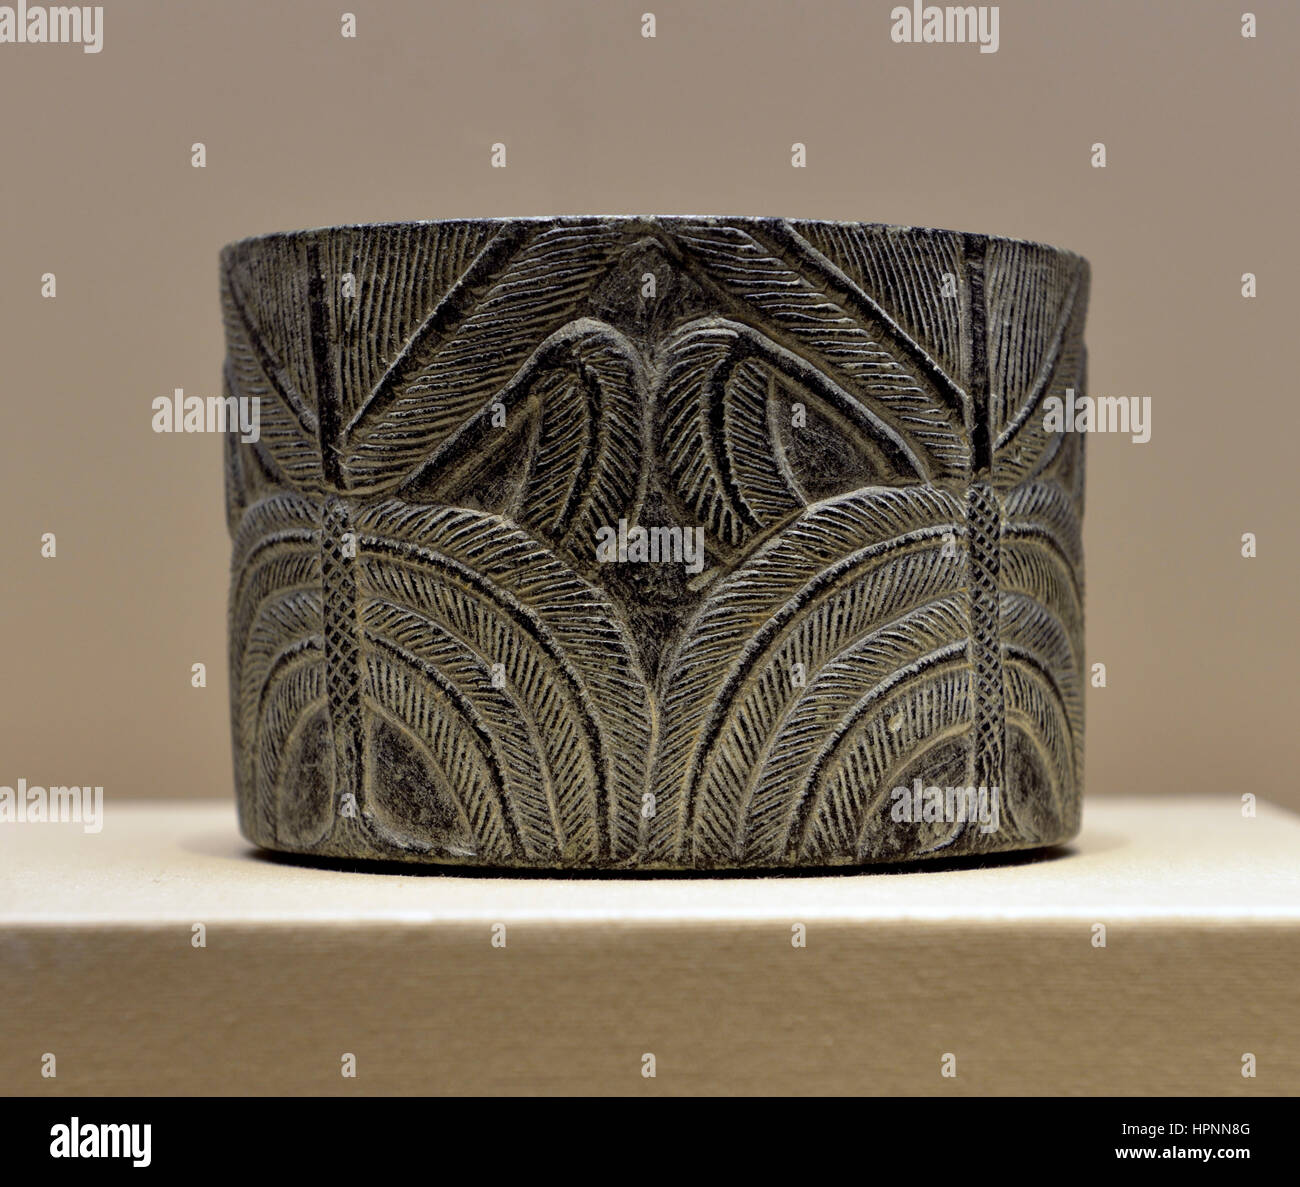 Cylindrical vessel with palm tree. Late 3rd millennium BCE. Chlorite. National Museum, Riyadh. Stock Photo